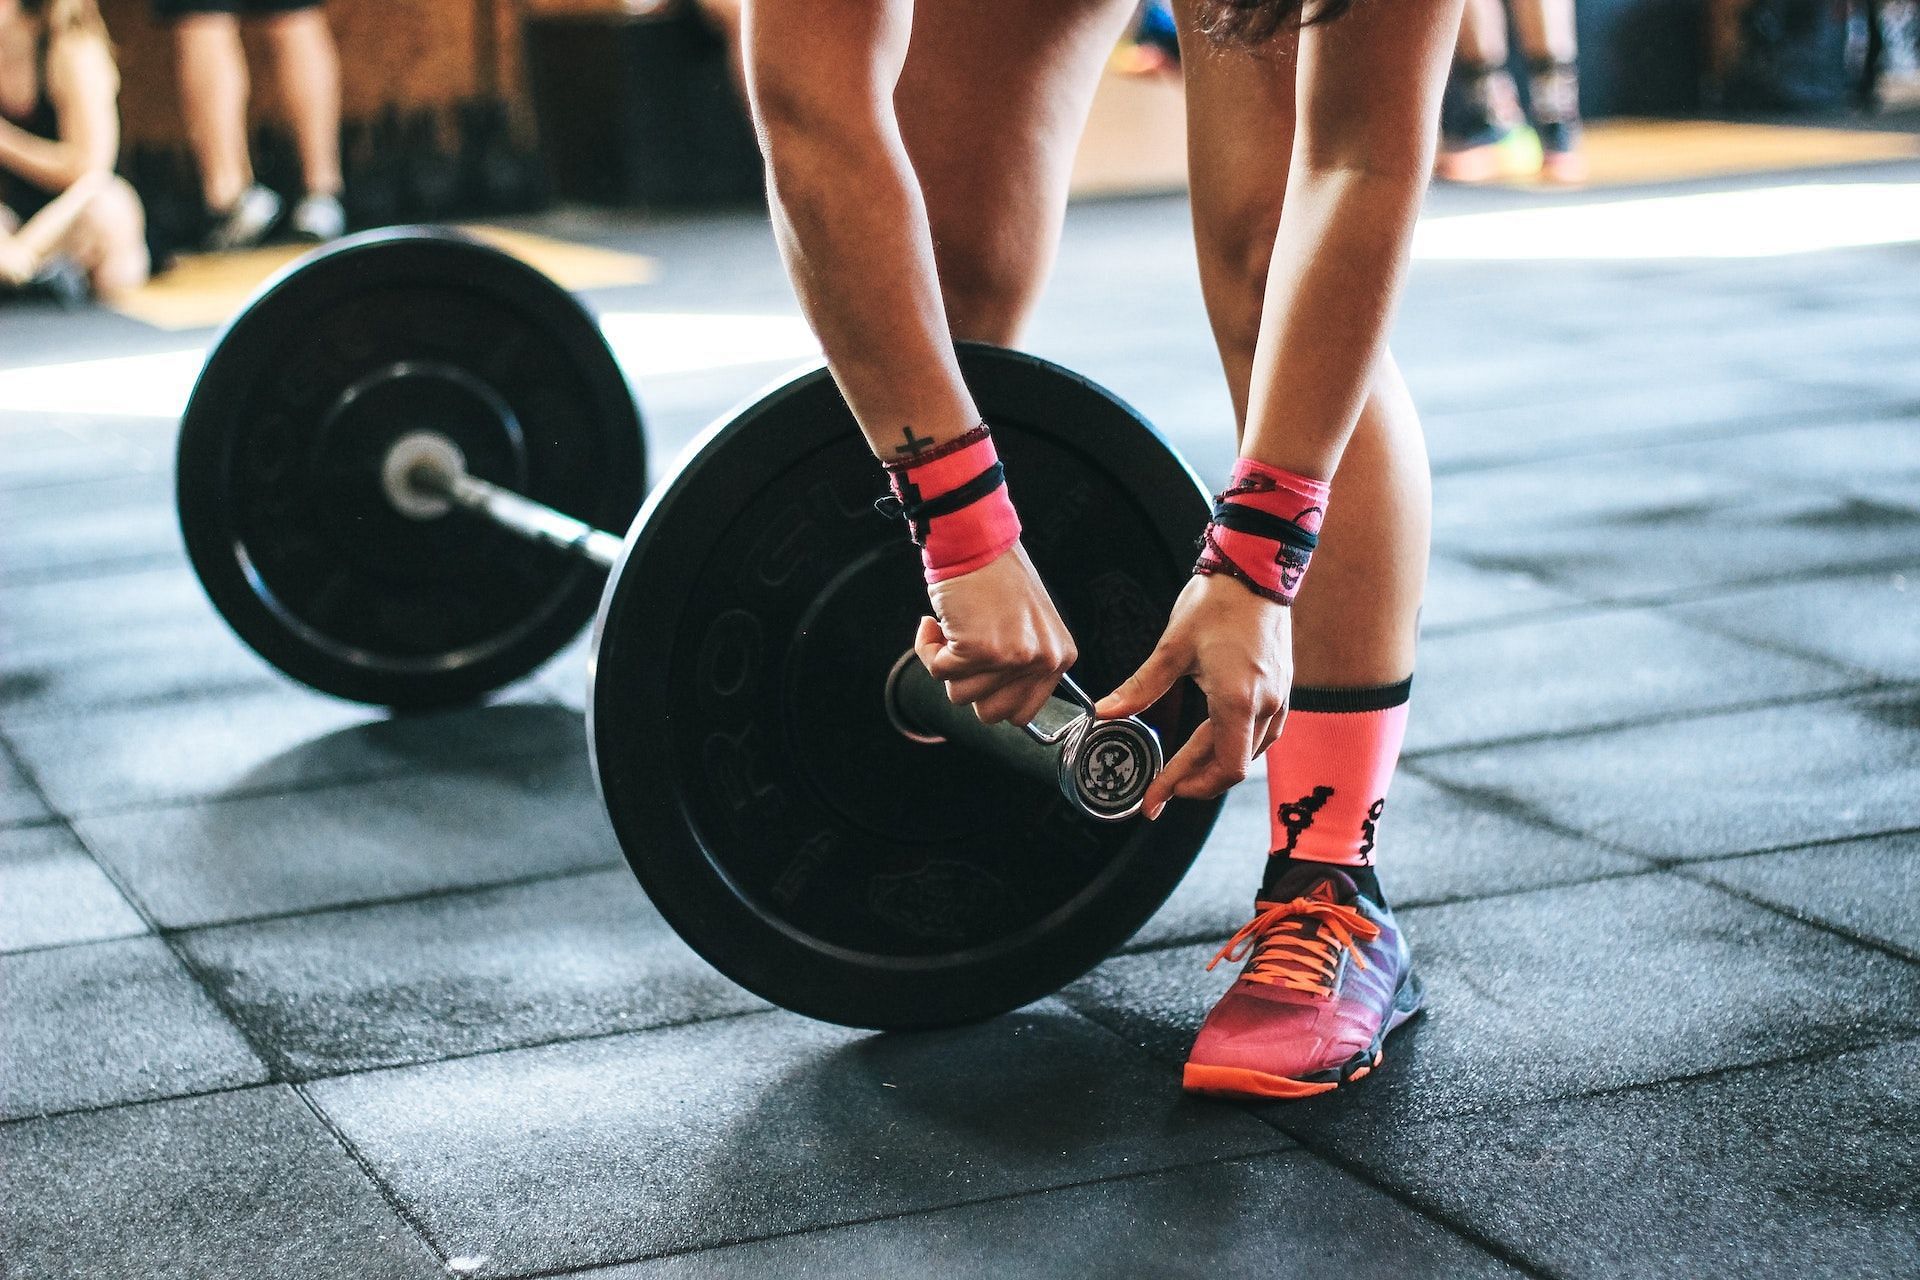 The barbell straight legged deadlift is a challenging variation. (Photo via Pexels/Victor Freitas)